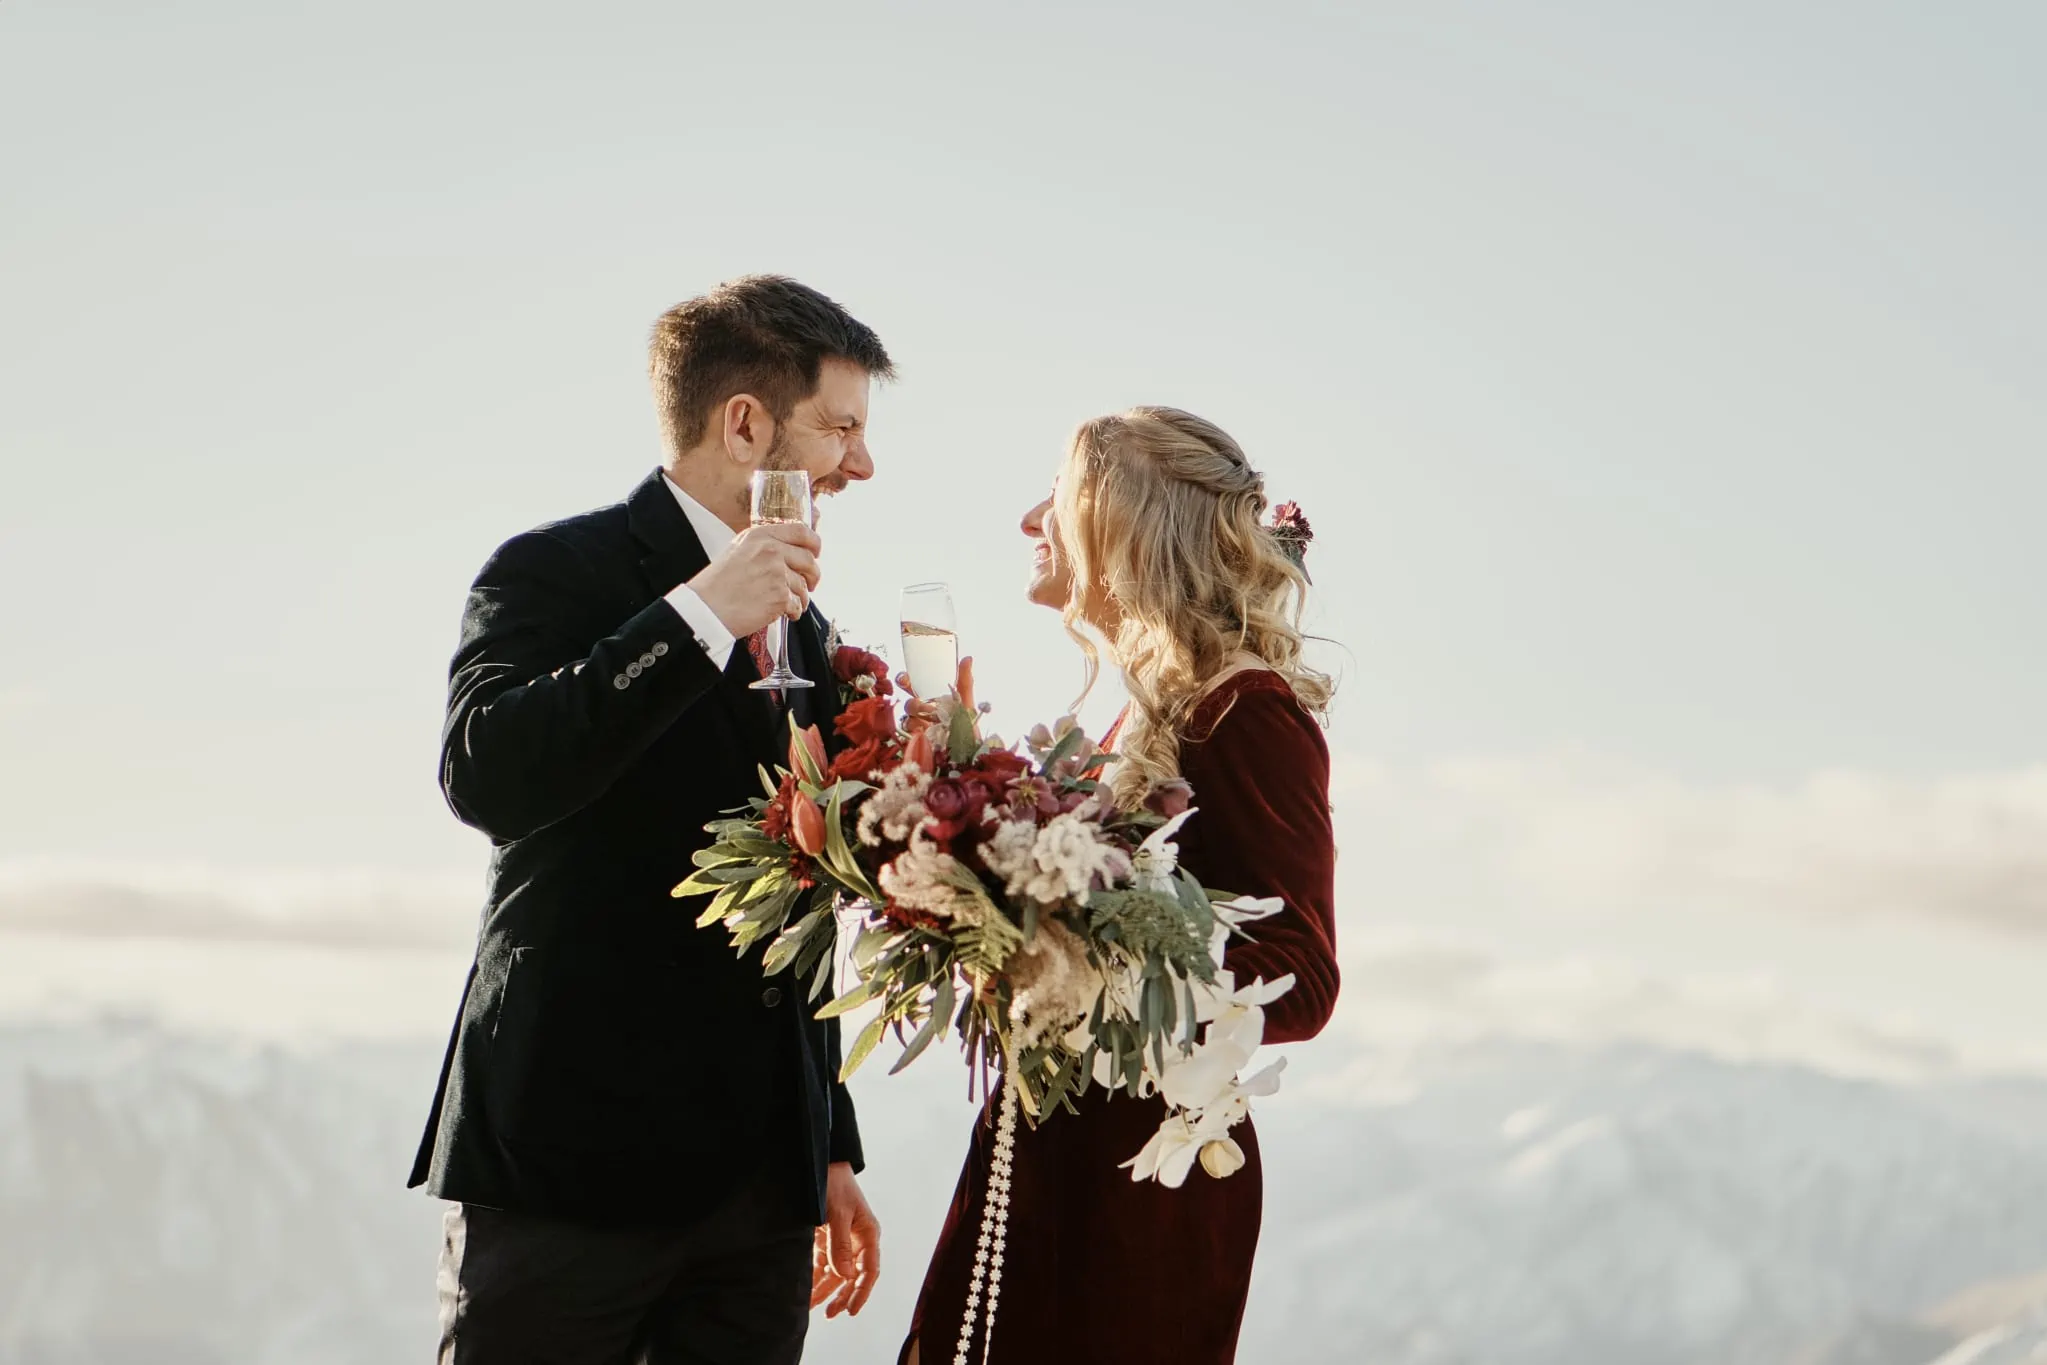 Claire and Rob toast during their Heli Elopement Wedding at Cecil Peak in New Zealand.